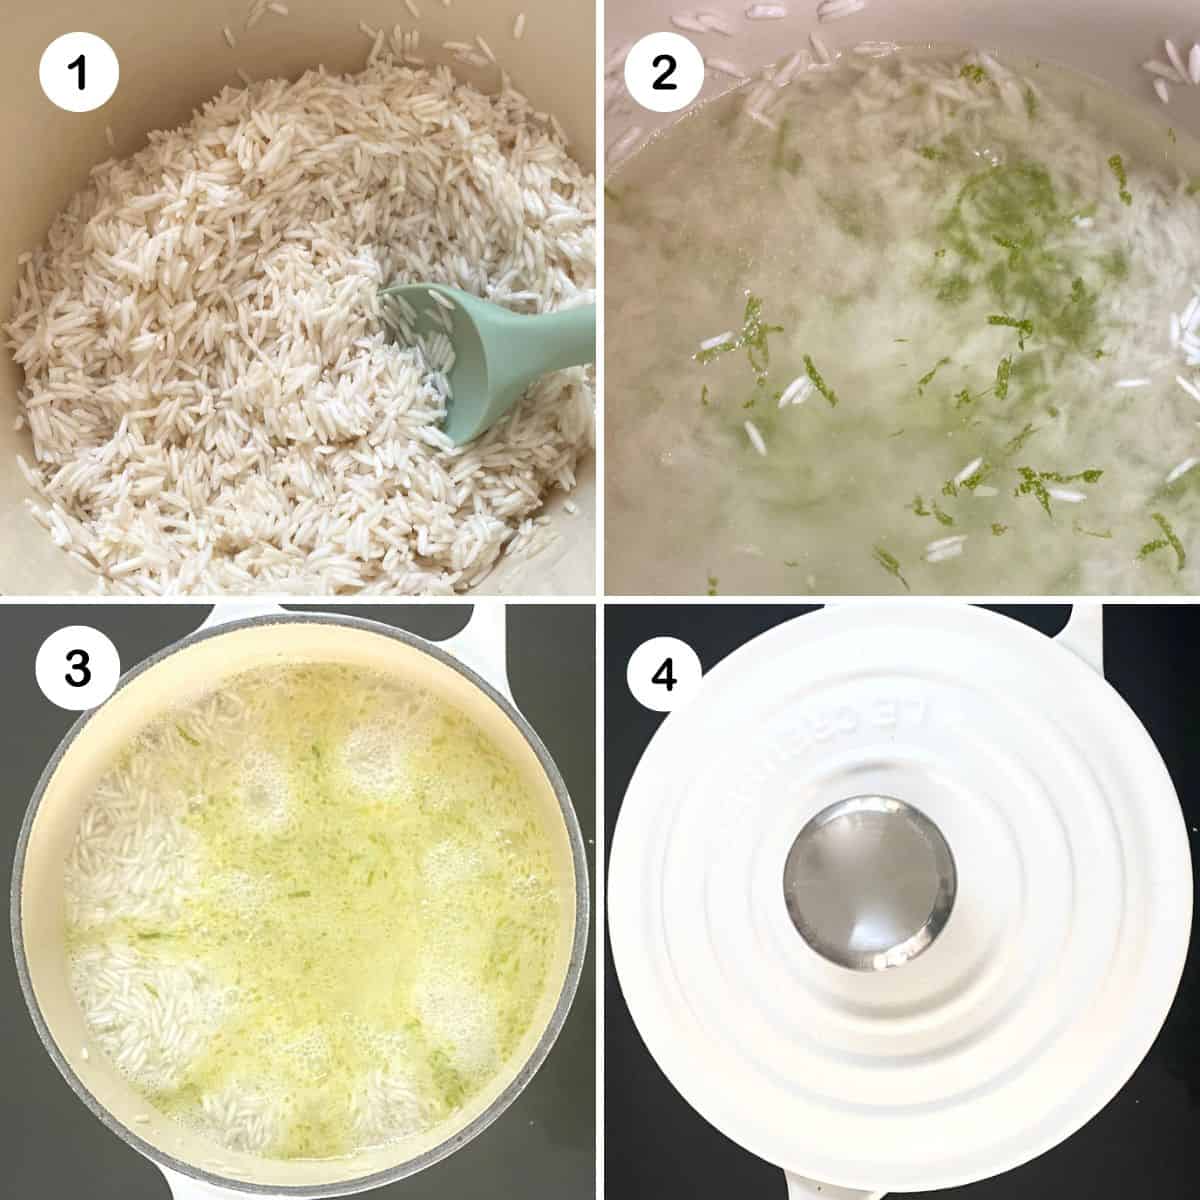 Steps for cooking cilantro lime rice